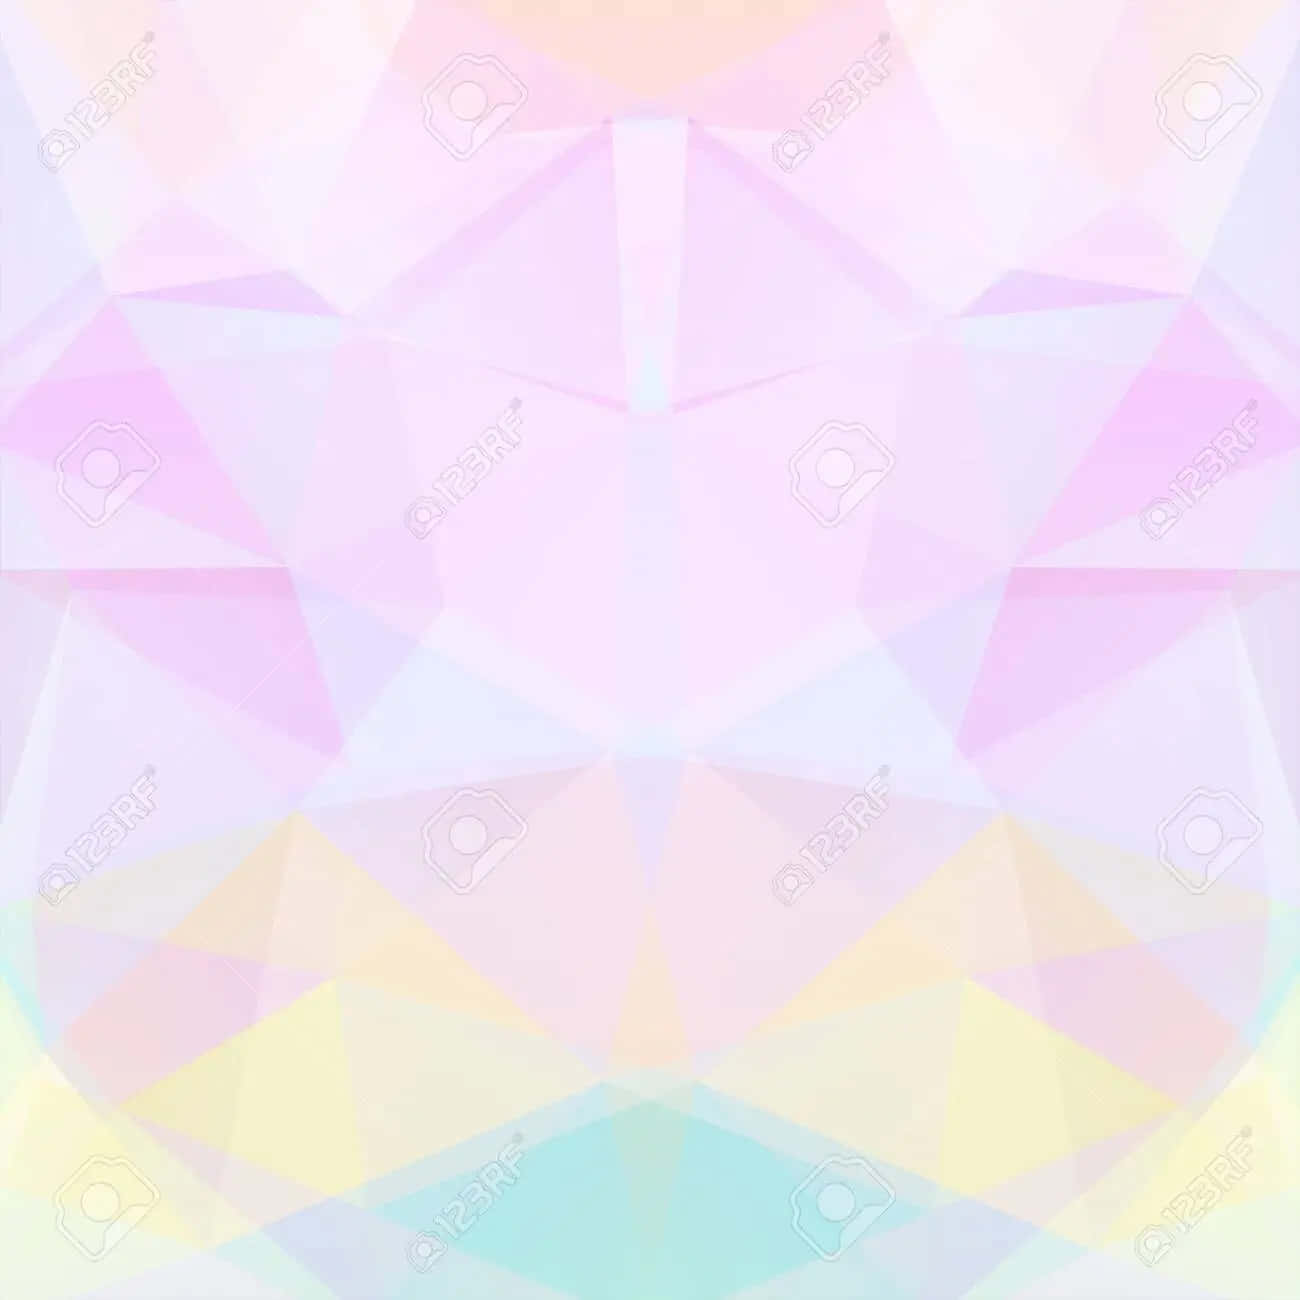 A Bright and Colorful Abstract Wall Art Wallpaper